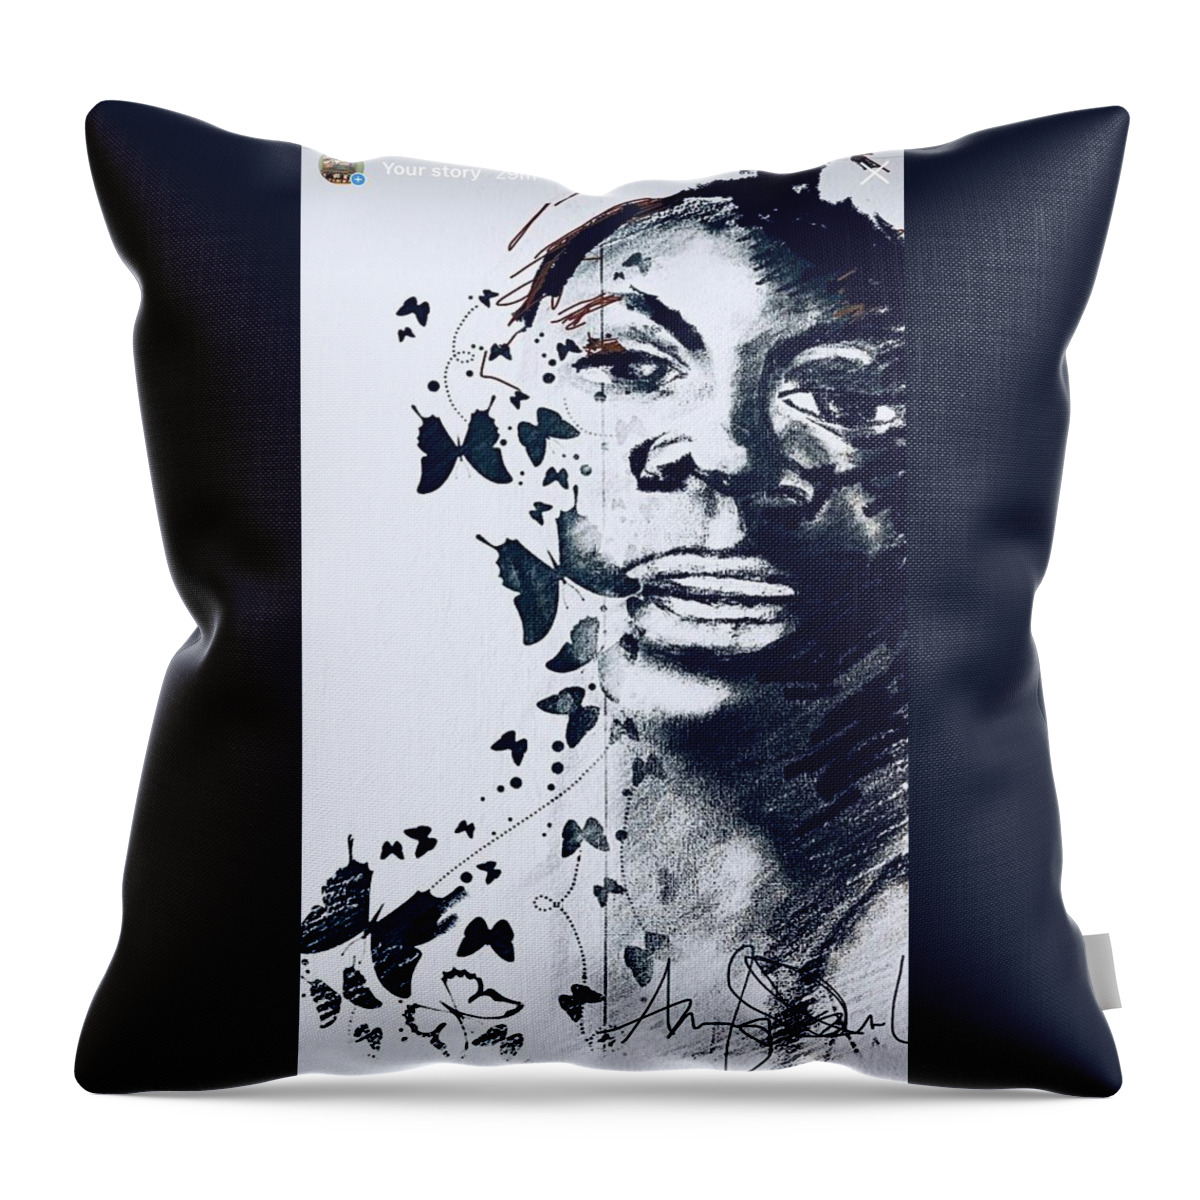  Throw Pillow featuring the mixed media Nina by Angie ONeal